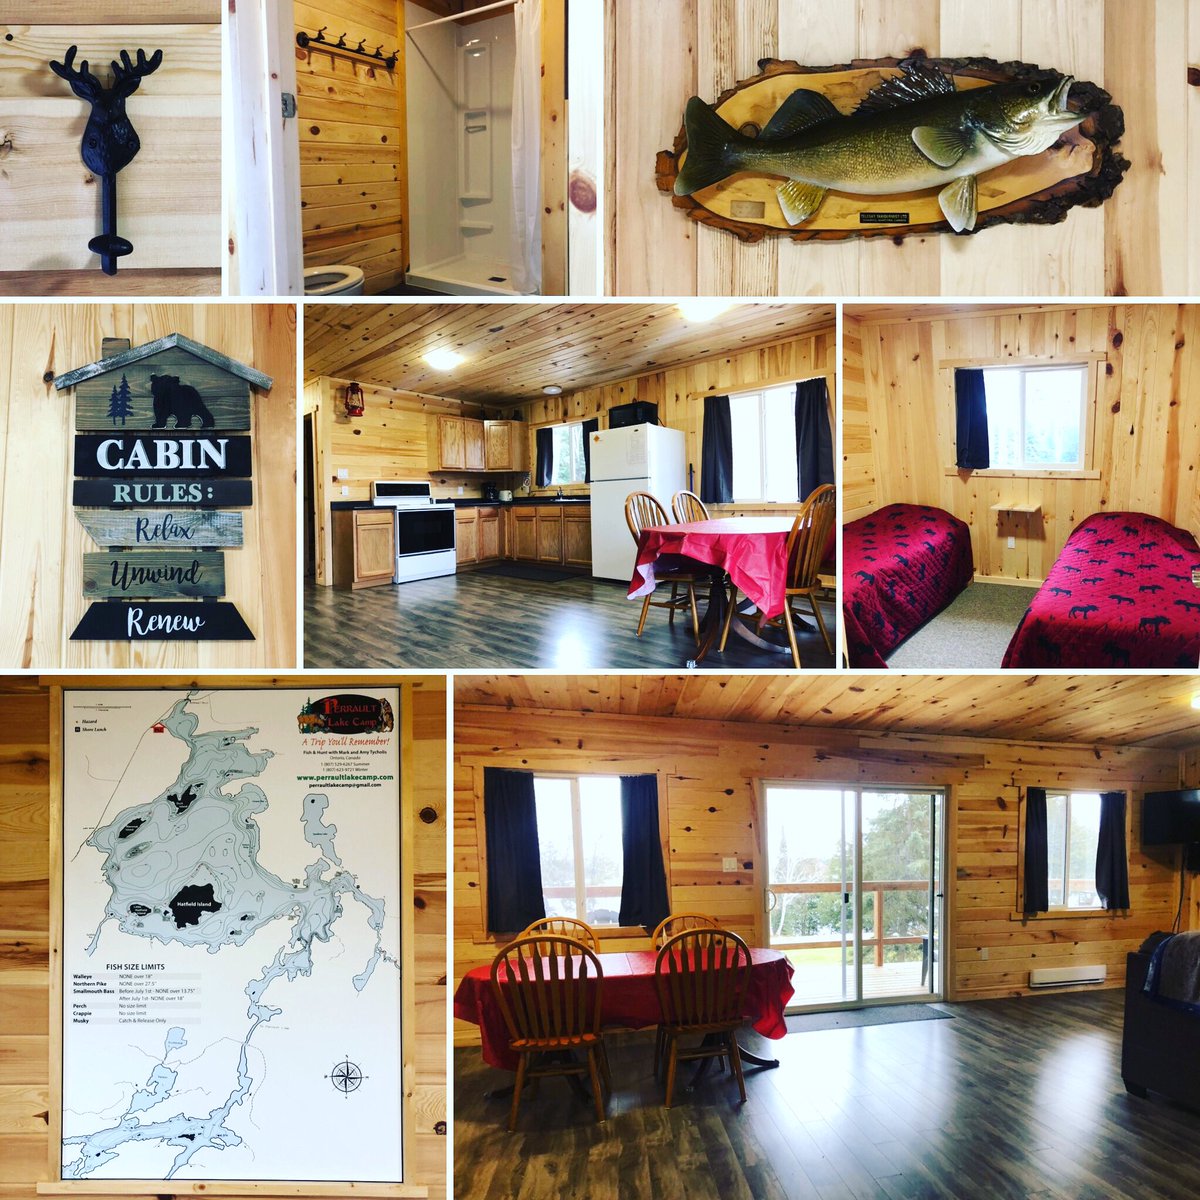 Beautifully cabin 7 #complete 
#perraultlakecamp #homeawayfromhome #cabin7 #knottypine #cabinlife #lakelife #fishinglife #sunsetcountry #Ontario #fishcanada #walleyenation #muskyfishing #perraultlake #perraultfalls #hwy105 #loveplc